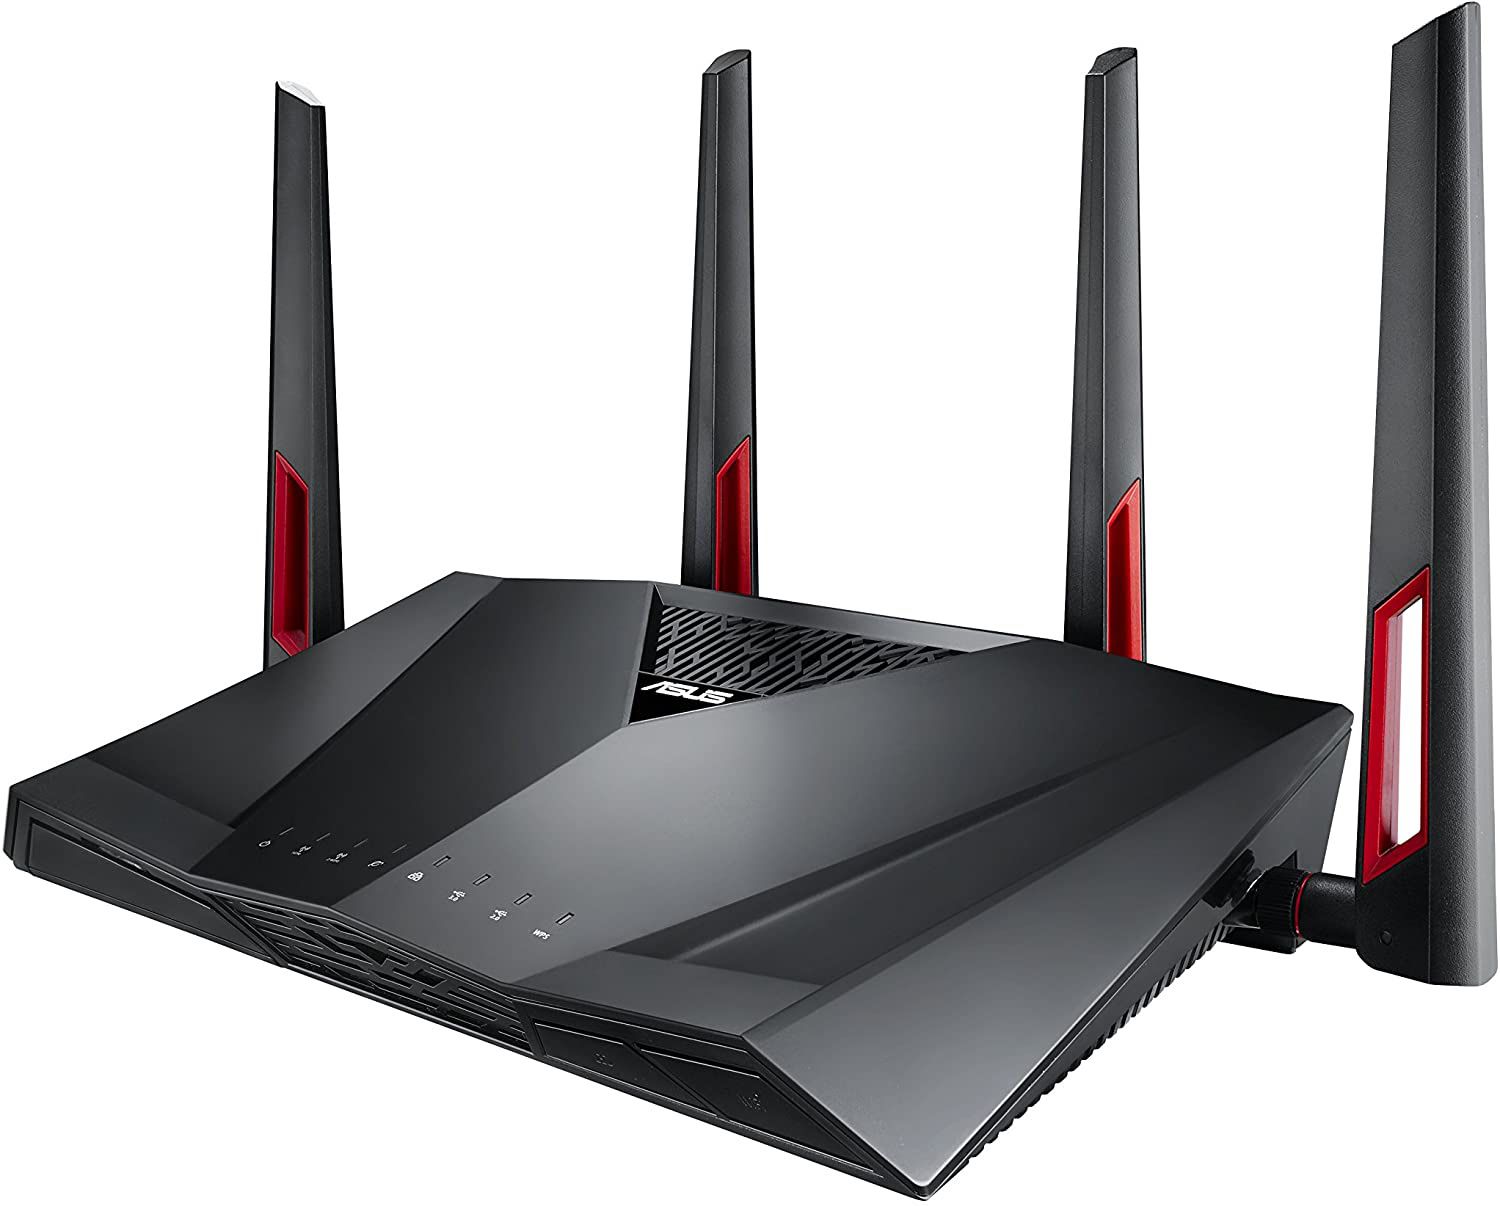 ASUS AC3100 WiFi Dual Band Wireless Internet Router